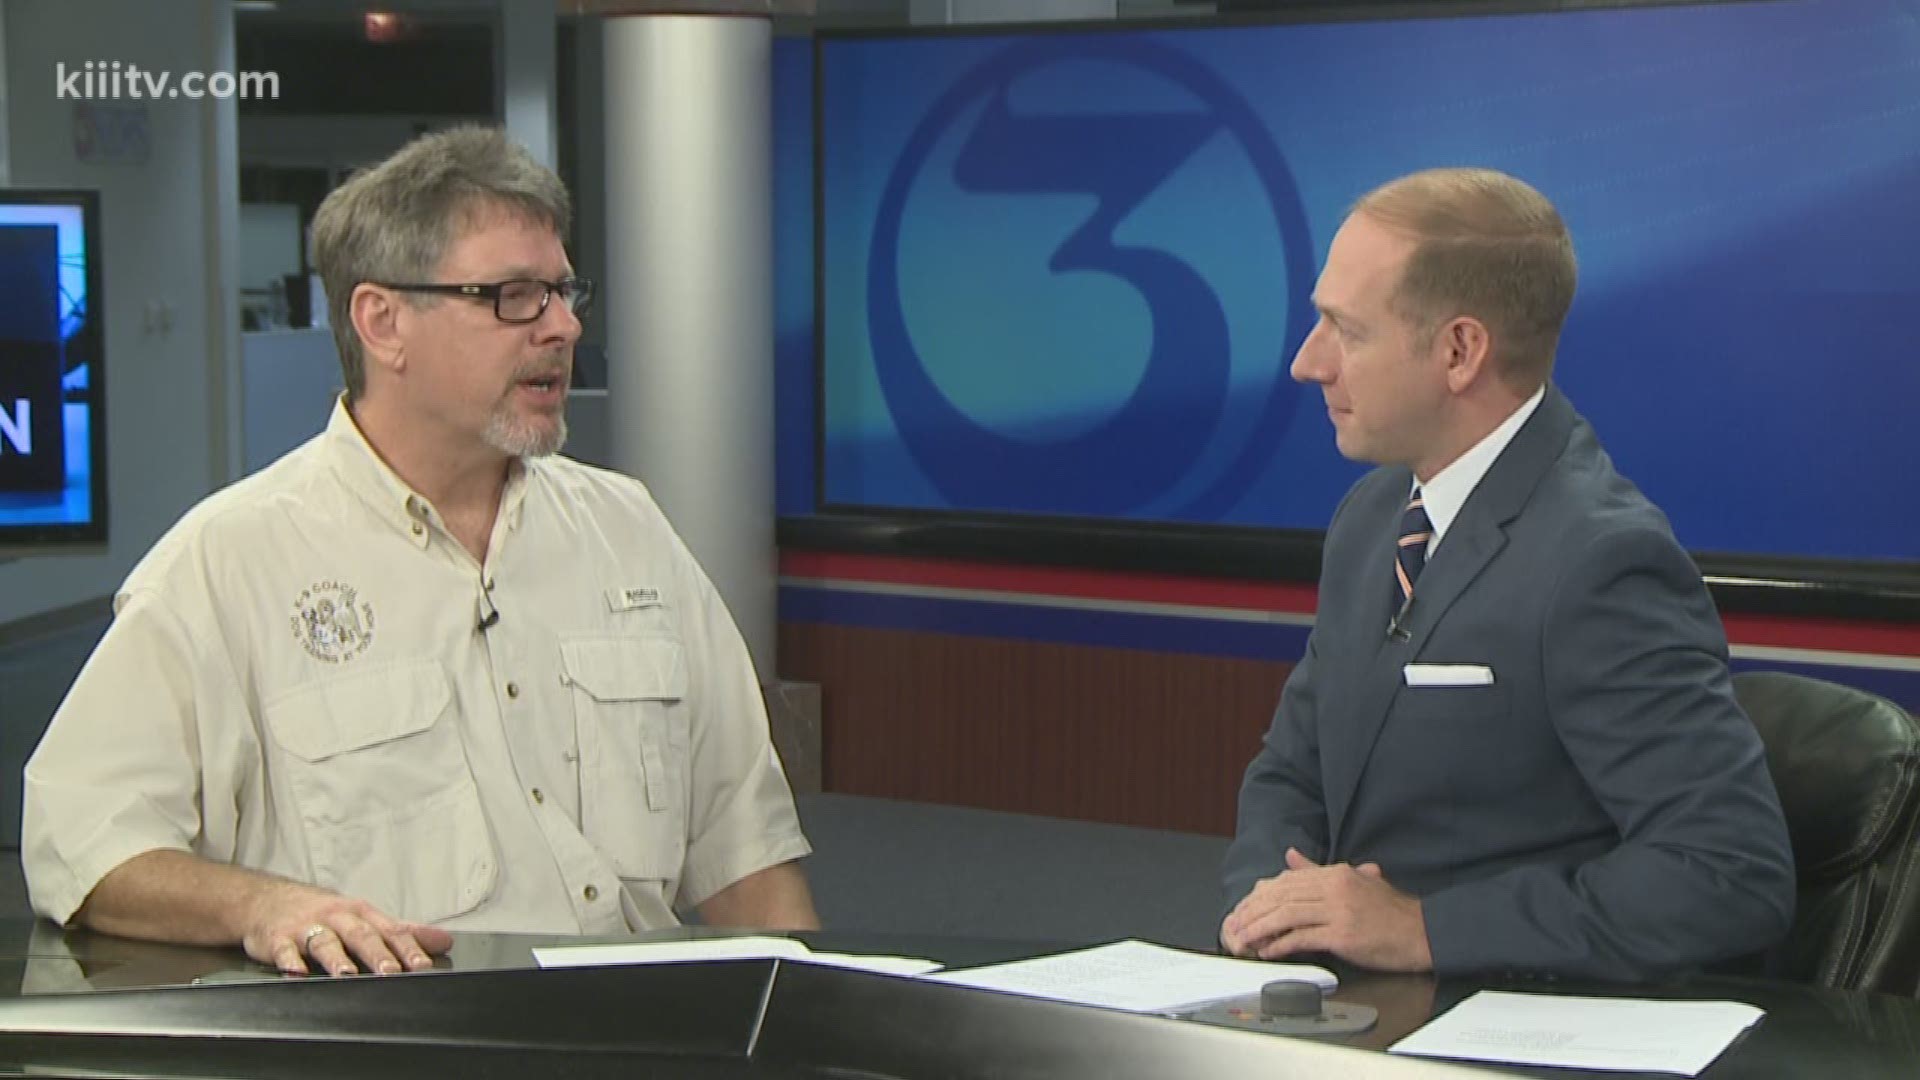 The K9 Coach, Floyd Swydan joined us on 3 News First Edition to talk about things you should keep in mind when making a big move across the country with your pets.